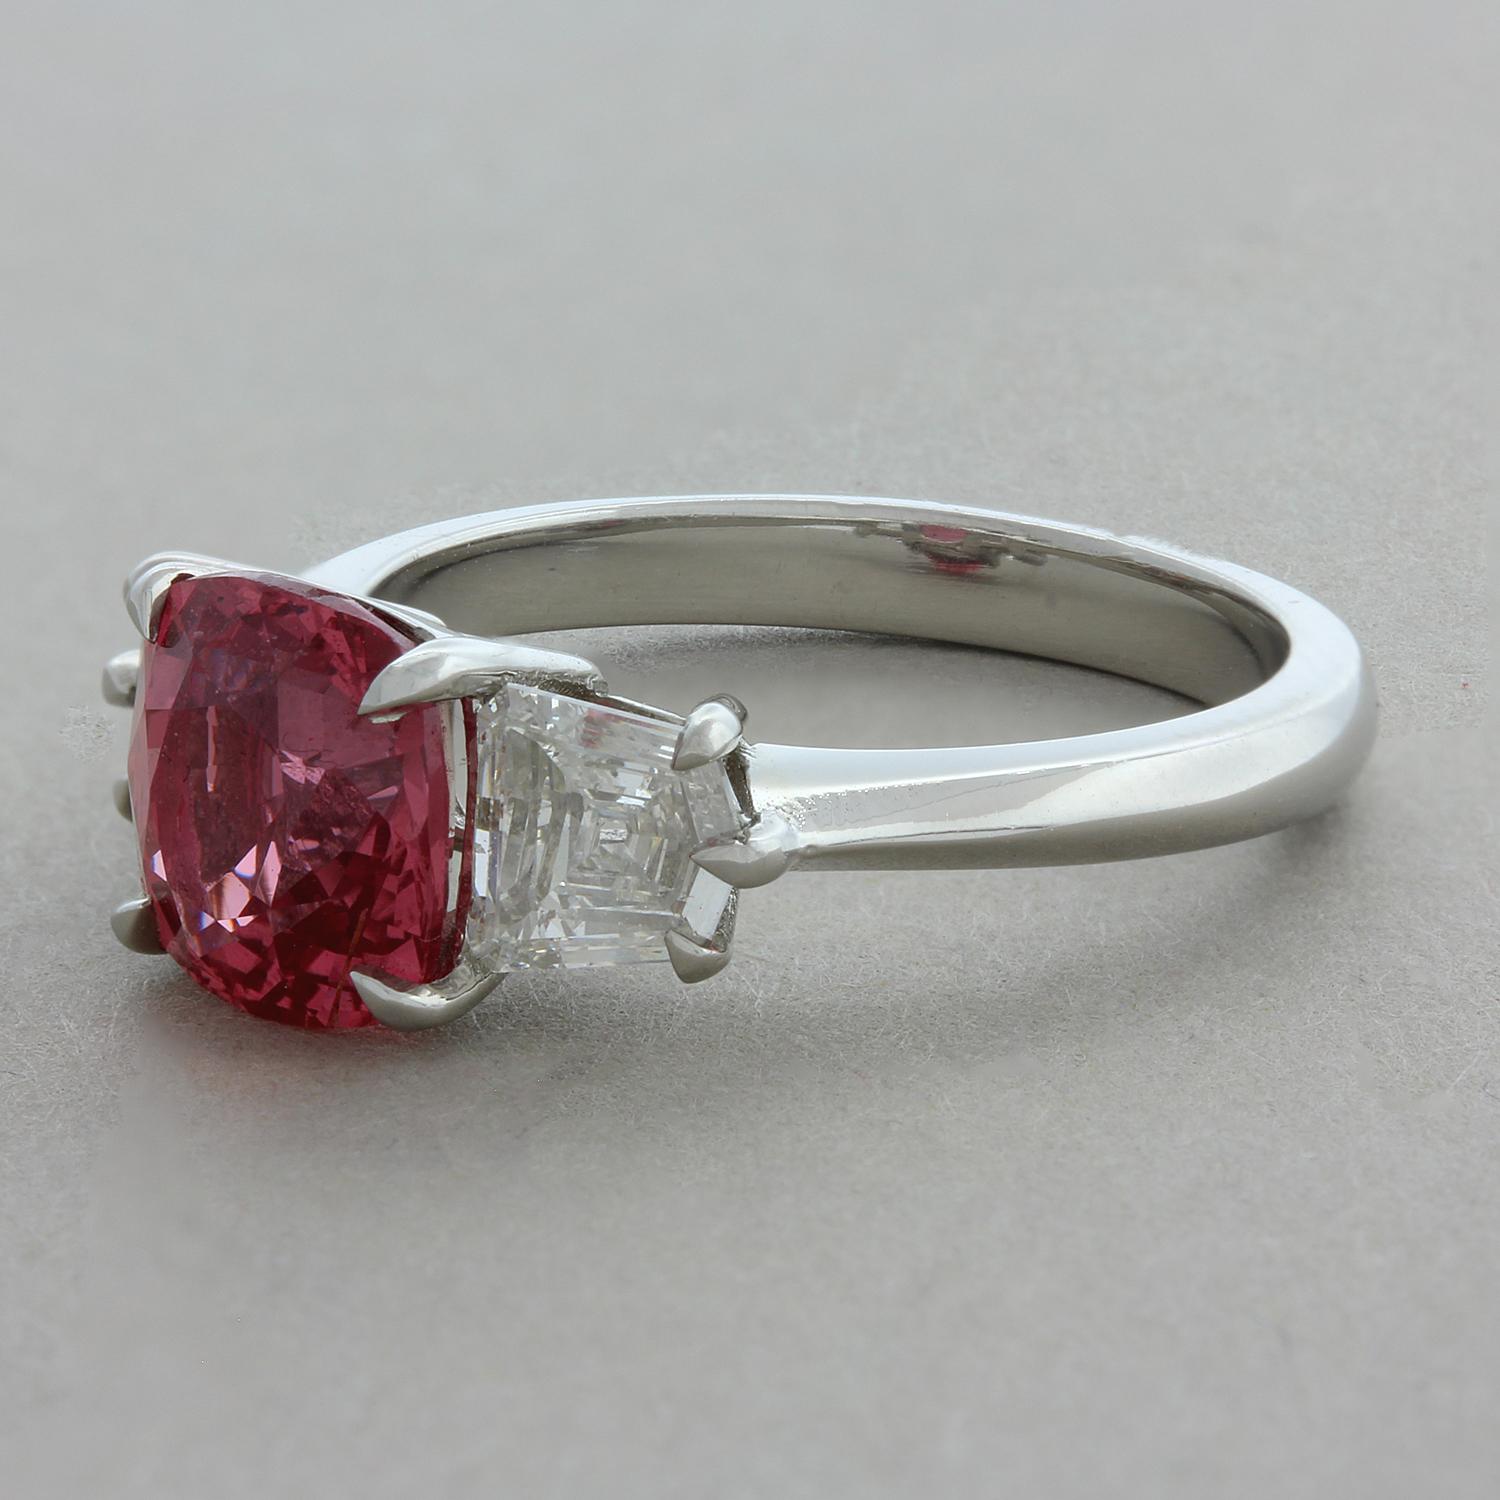 A true collectors pieces this ring features a rare orangy pink Padparadscha sapphire weighing 3.03 carats. Certified by the GIA as a true Padparadscha this rare stone is difficult to find in sizes 3 carats and above. It is accented by two shield cut